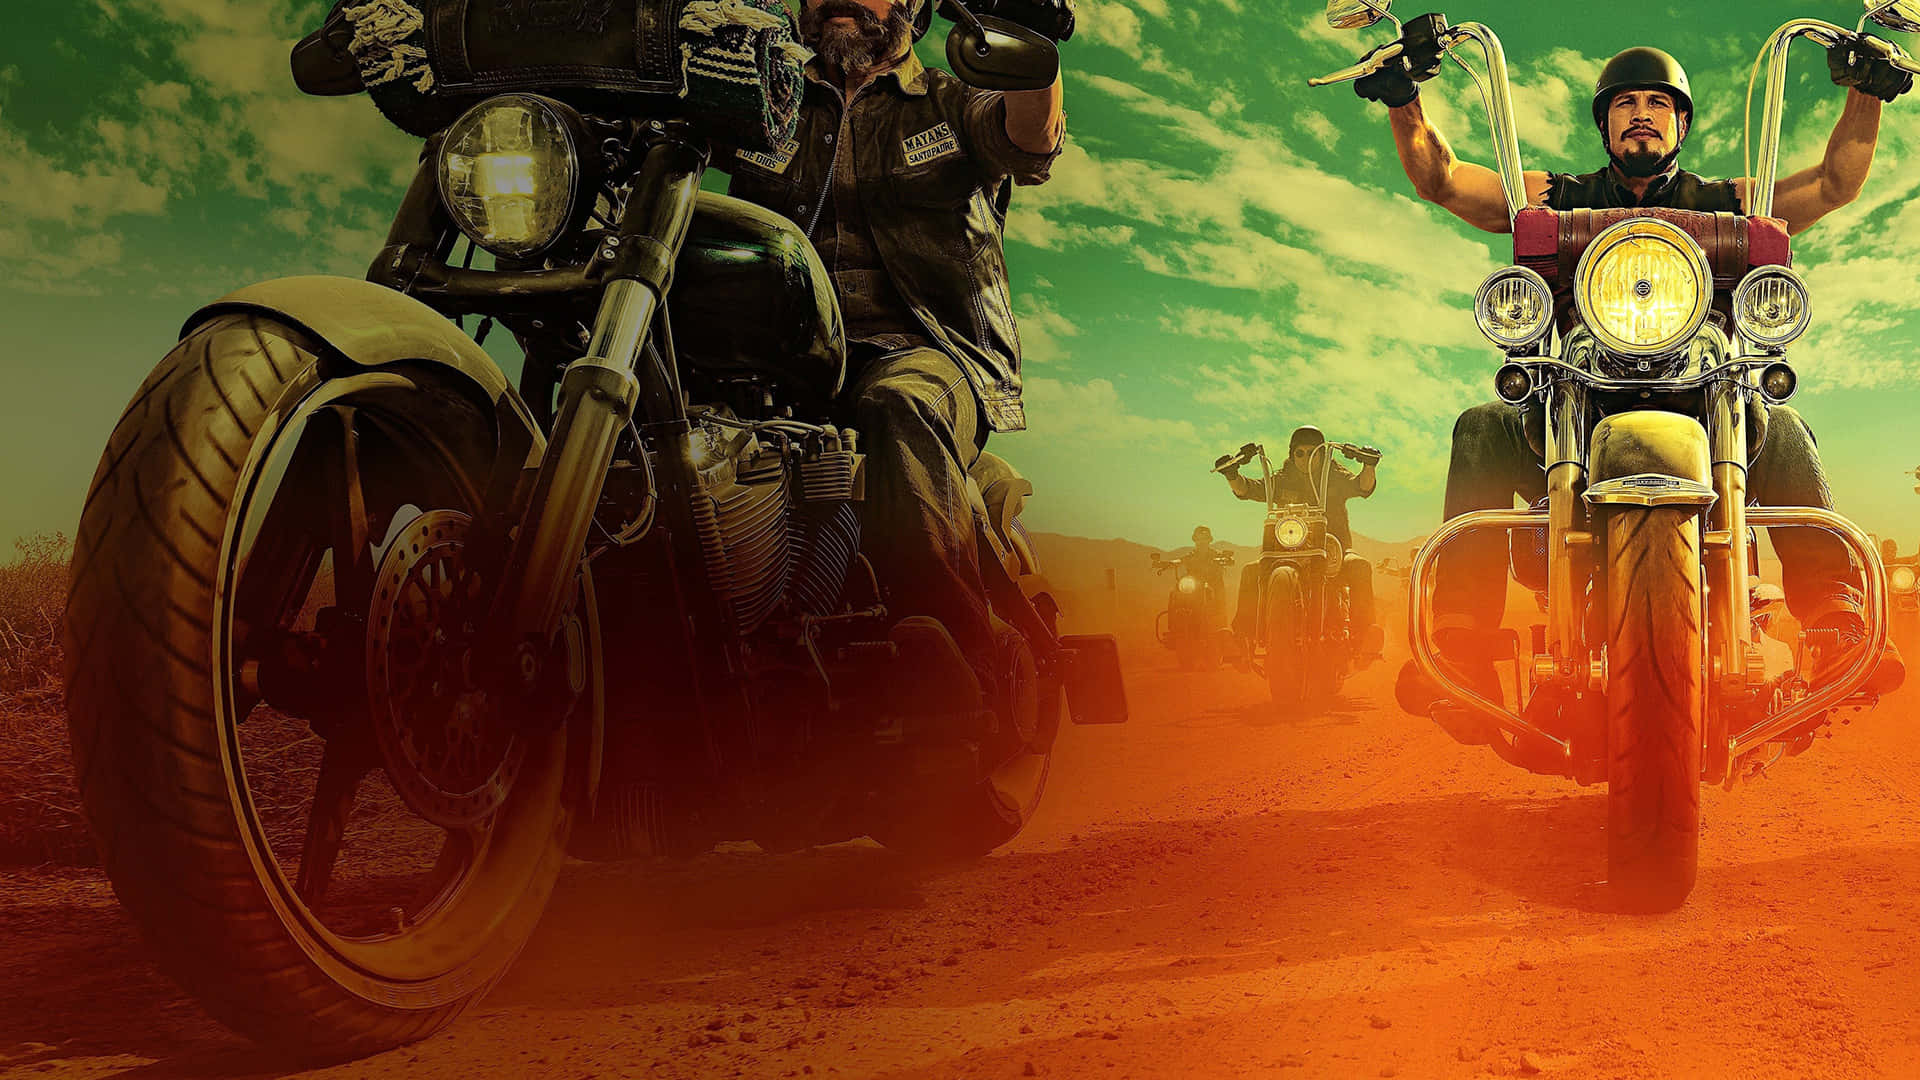 A Group Of Motorcycle Riders On A Dirt Road Wallpaper